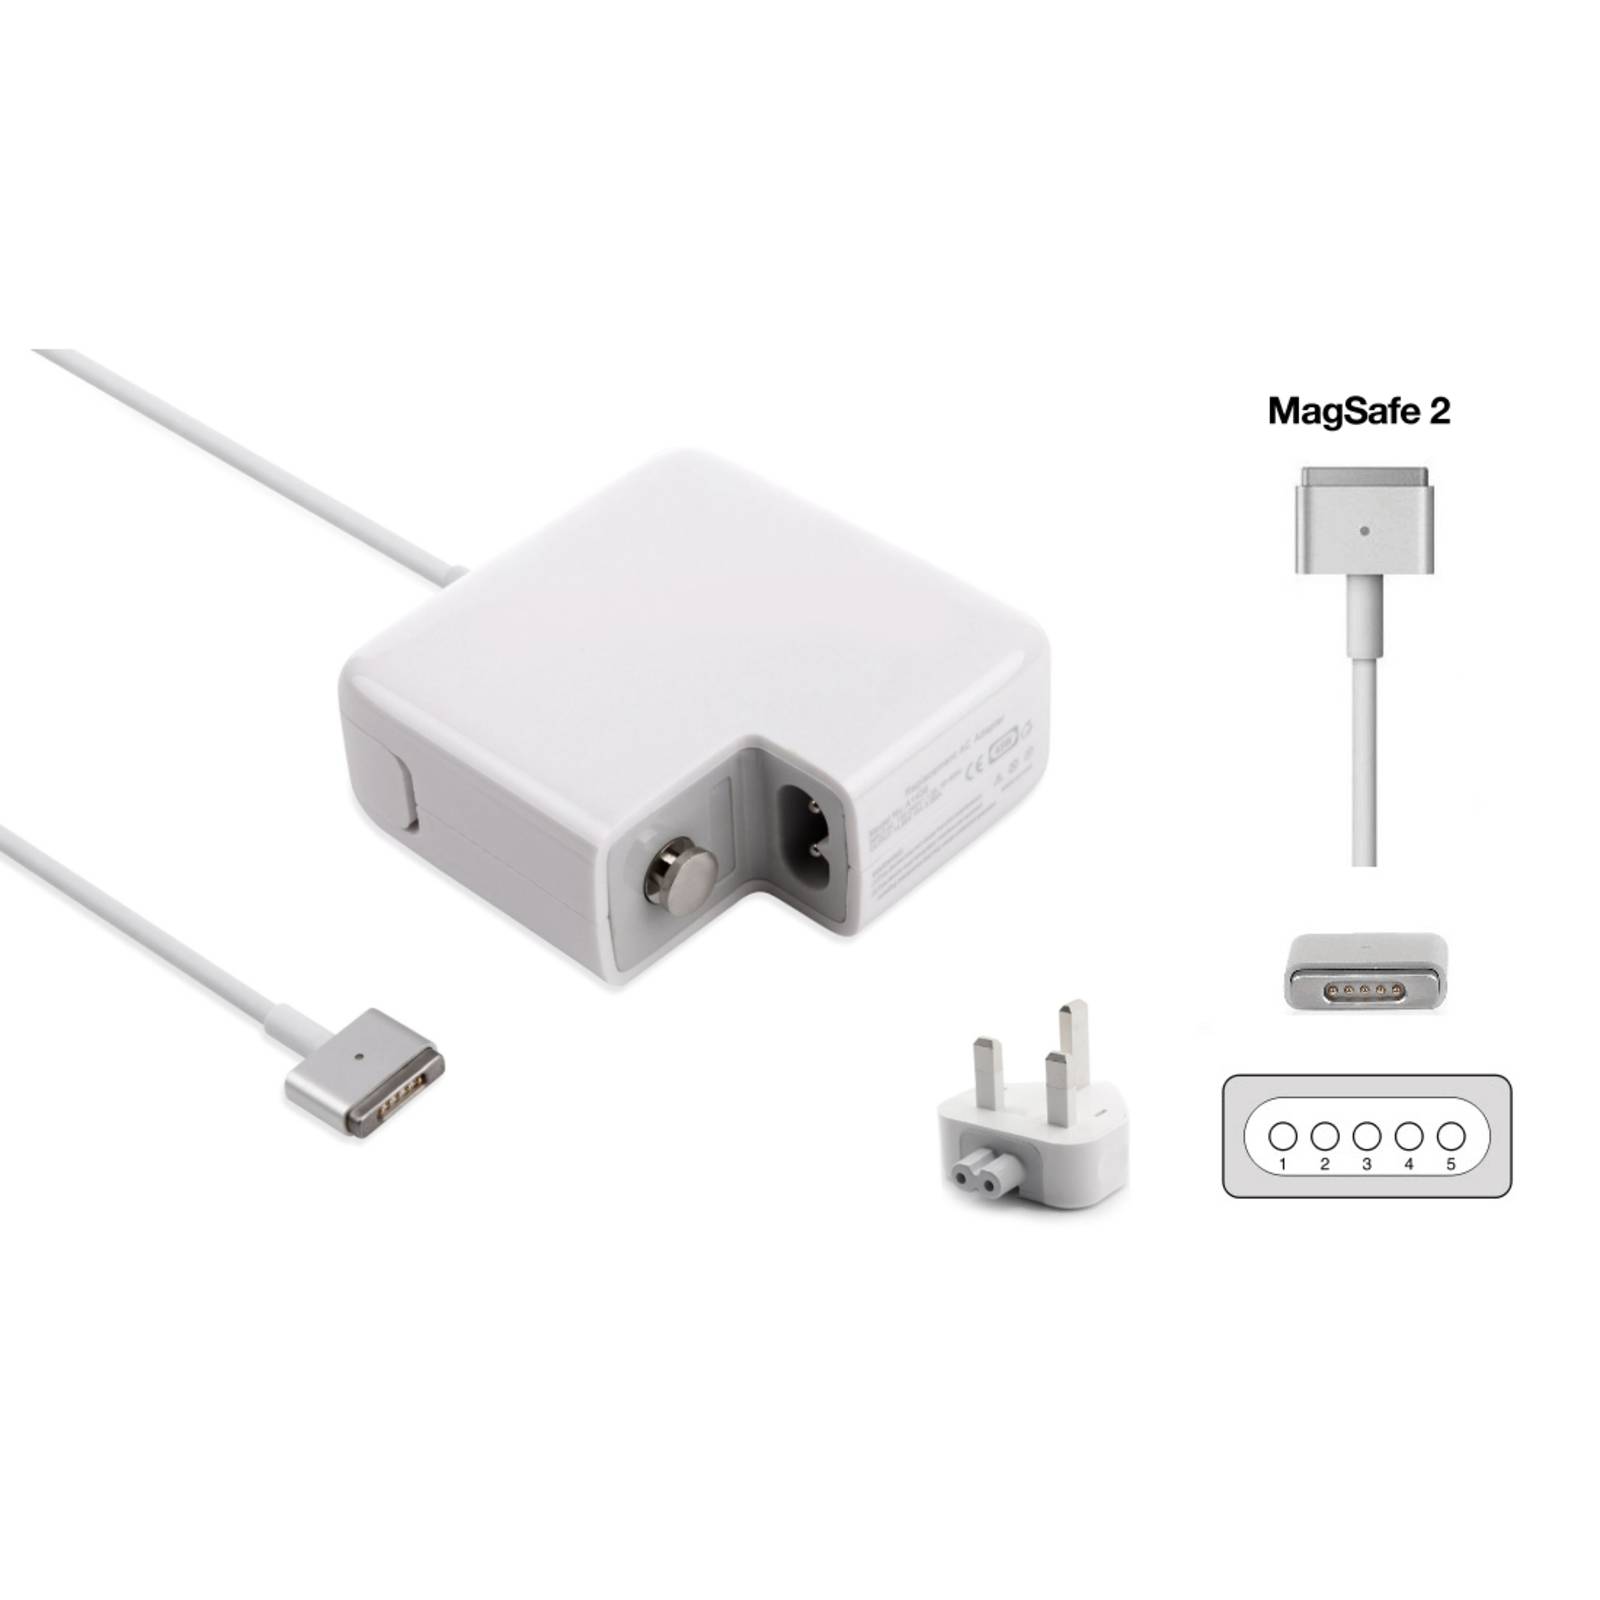 Compatible 20v (Apple Mac Compatible 20v 4.25A 85W Magsafe 2 Power Adaptor for MacBook Pro with Retina display)